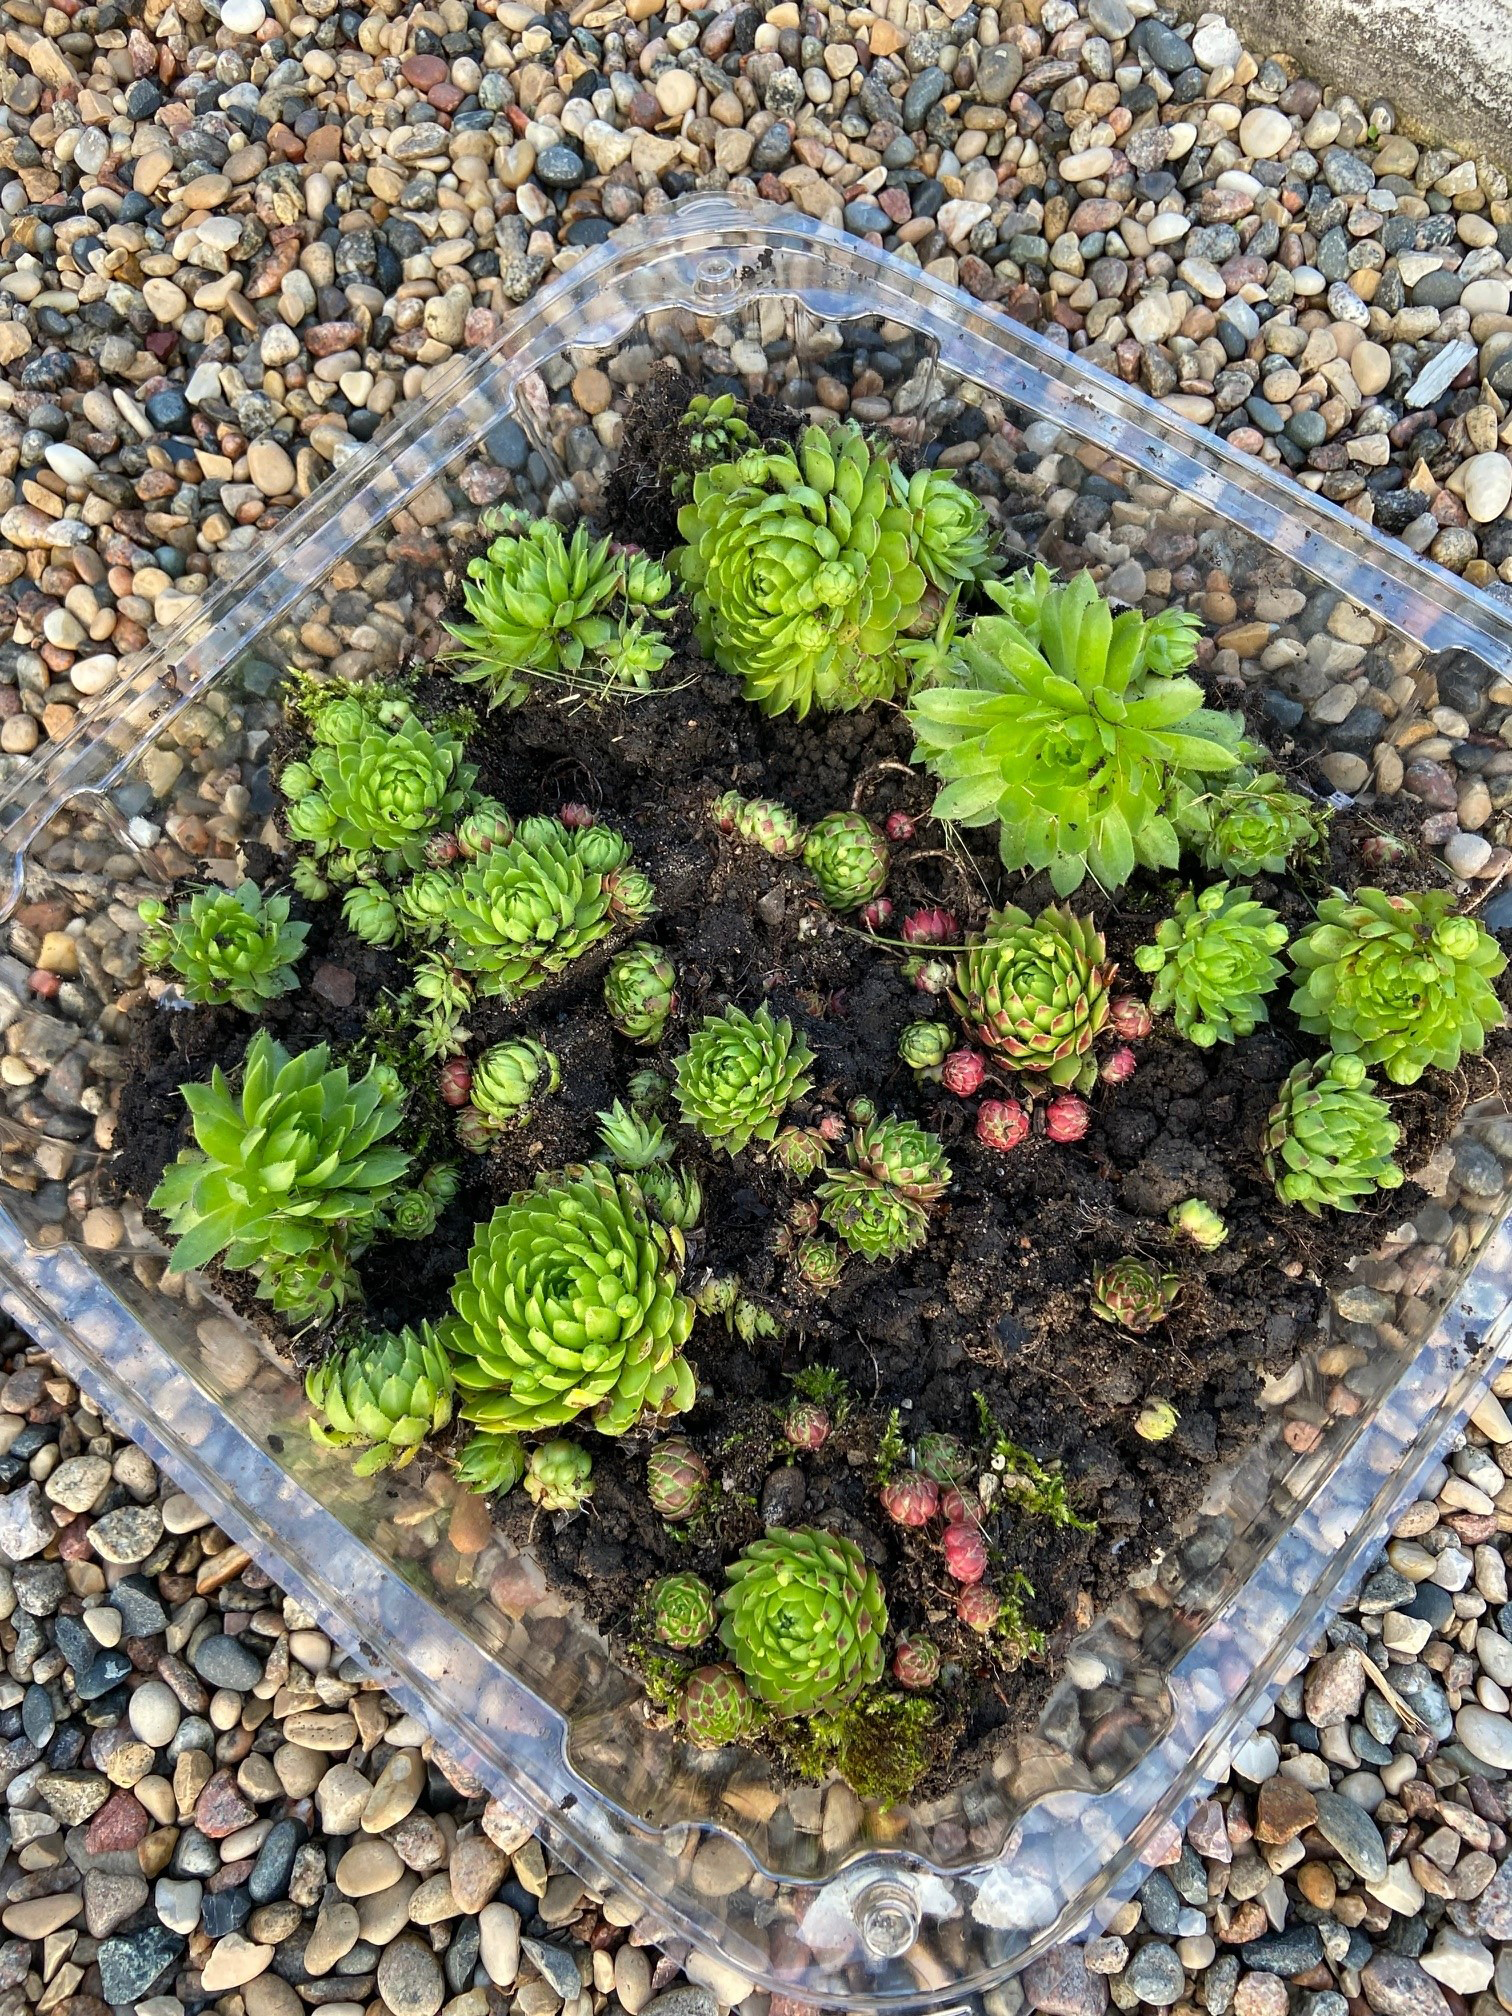 Image of a tray of succulents Amanda sells from her yard, which she then donates the funds to charities she supports.